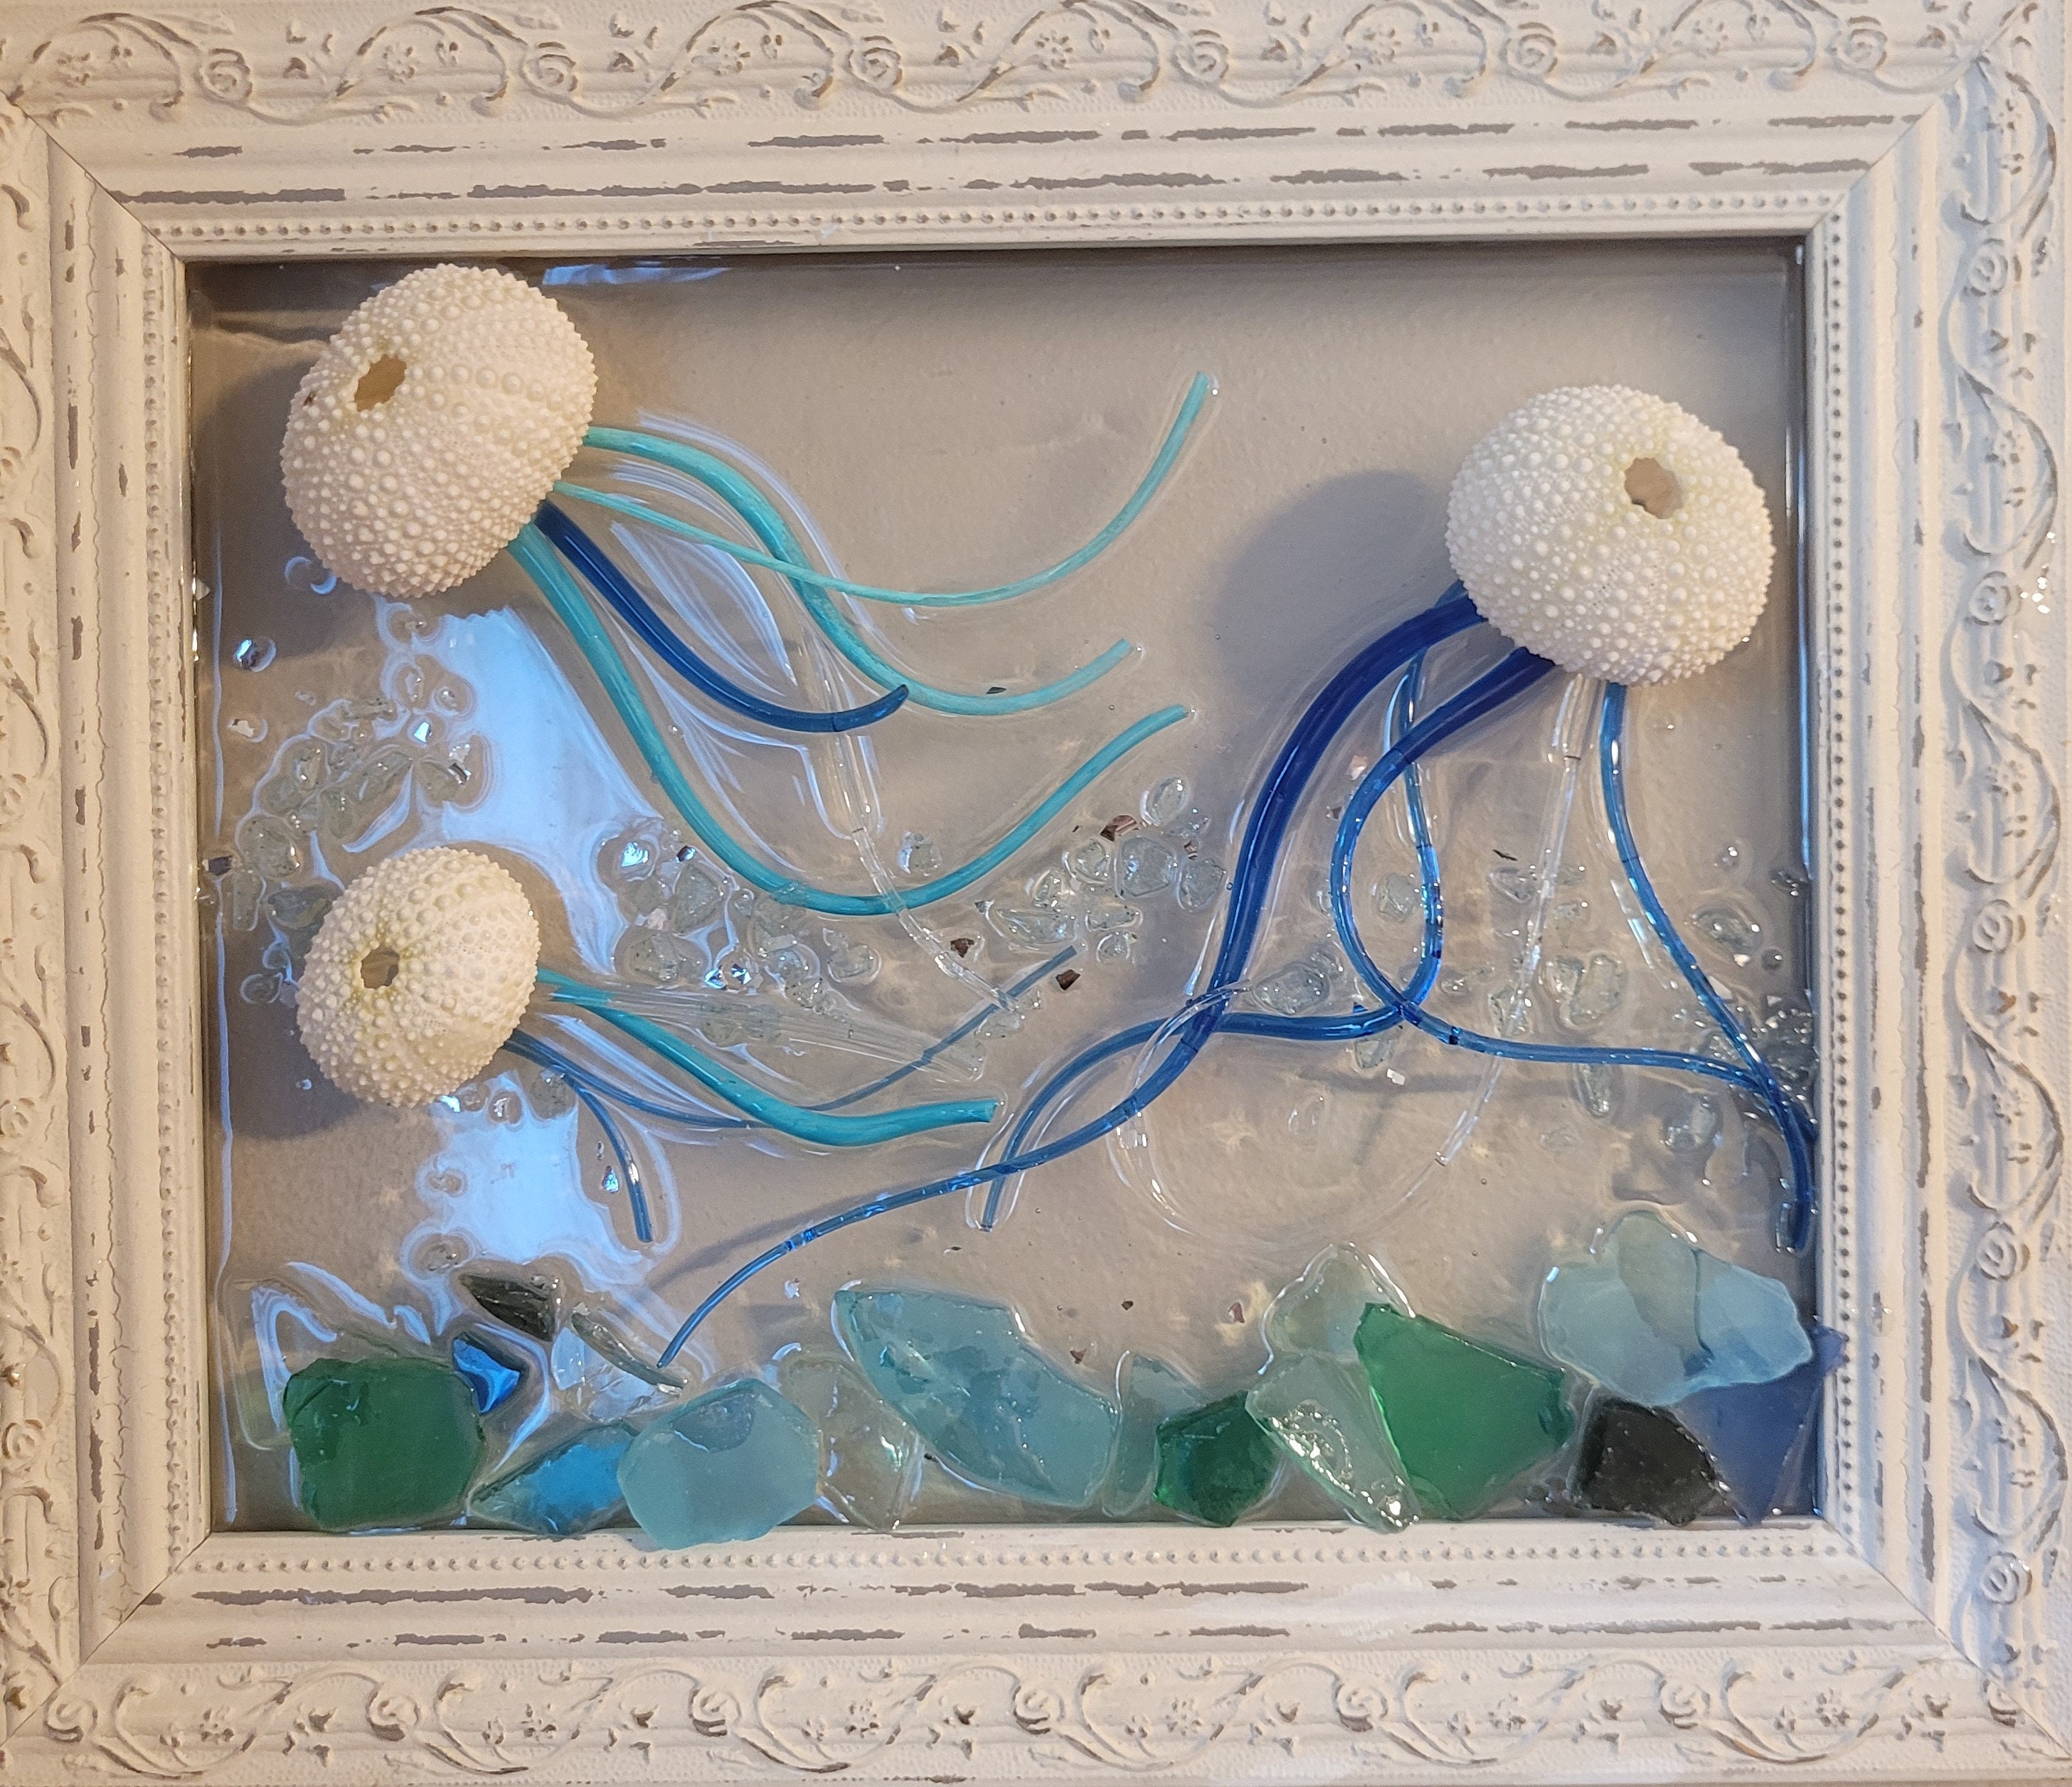 Kit, Do It Yourself DIY Resin Art Kit, Sea Glass Picture, Shell